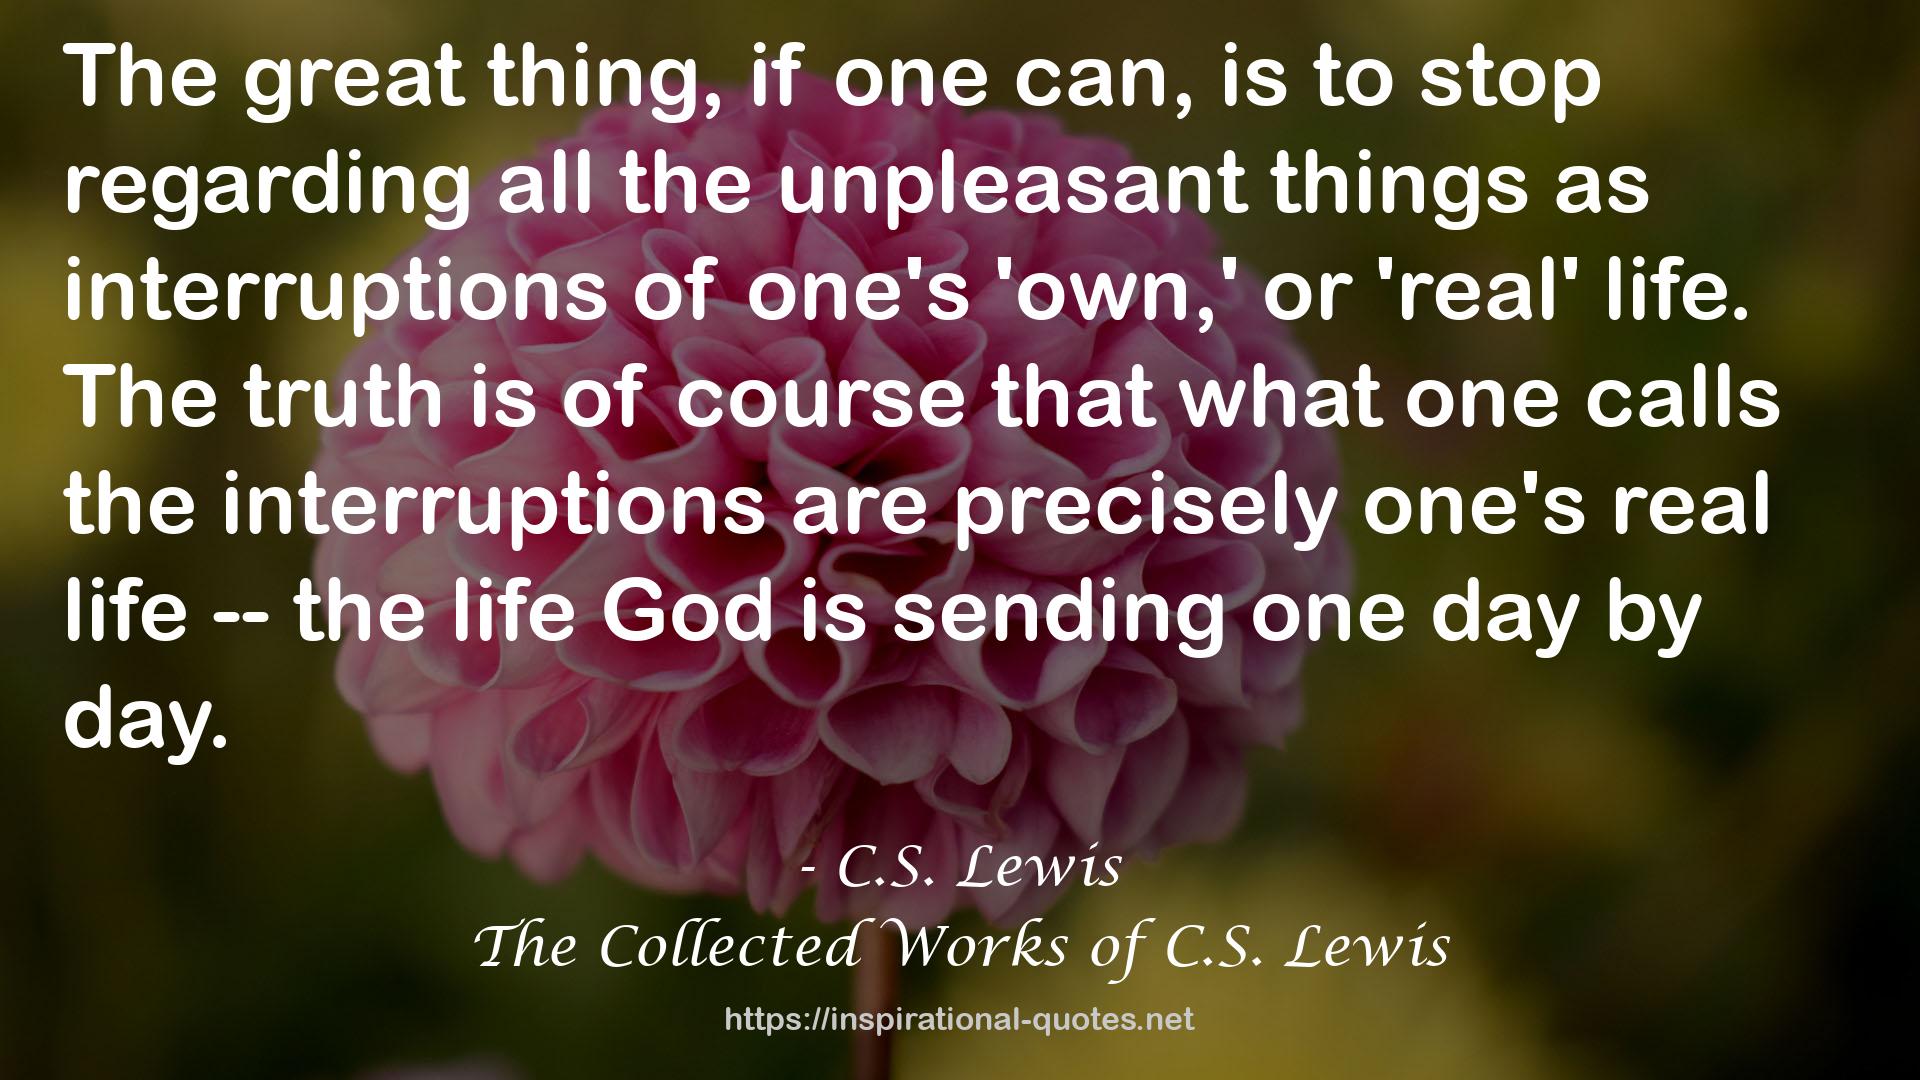 The Collected Works of C.S. Lewis QUOTES